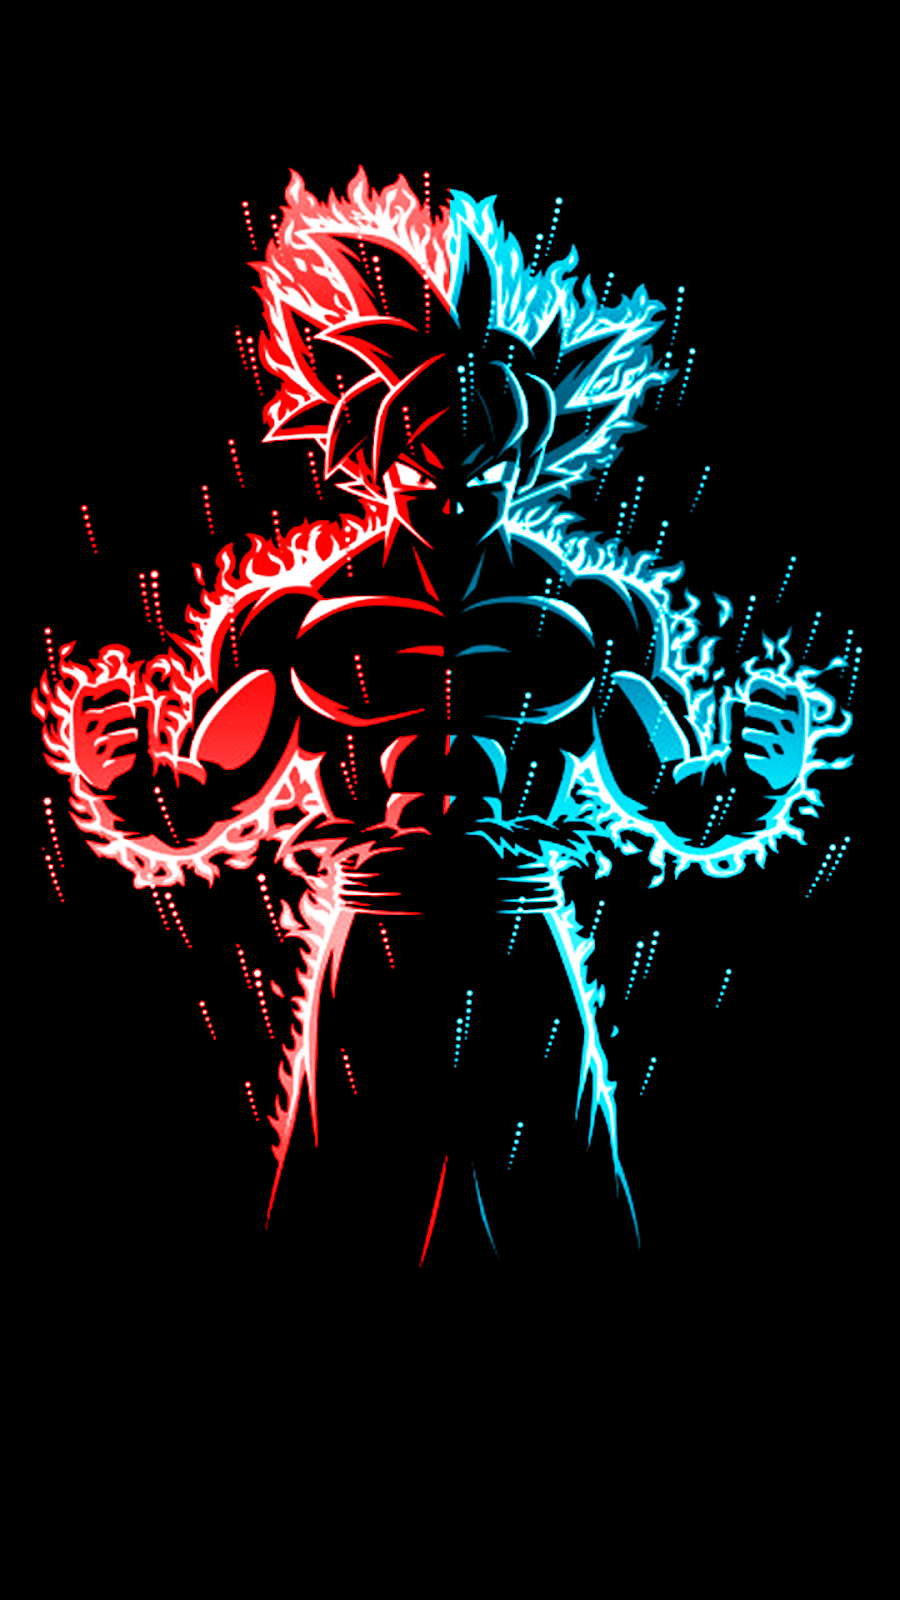 cool goku wallpapers,graphic design,fictional character,font,darkness,illustration